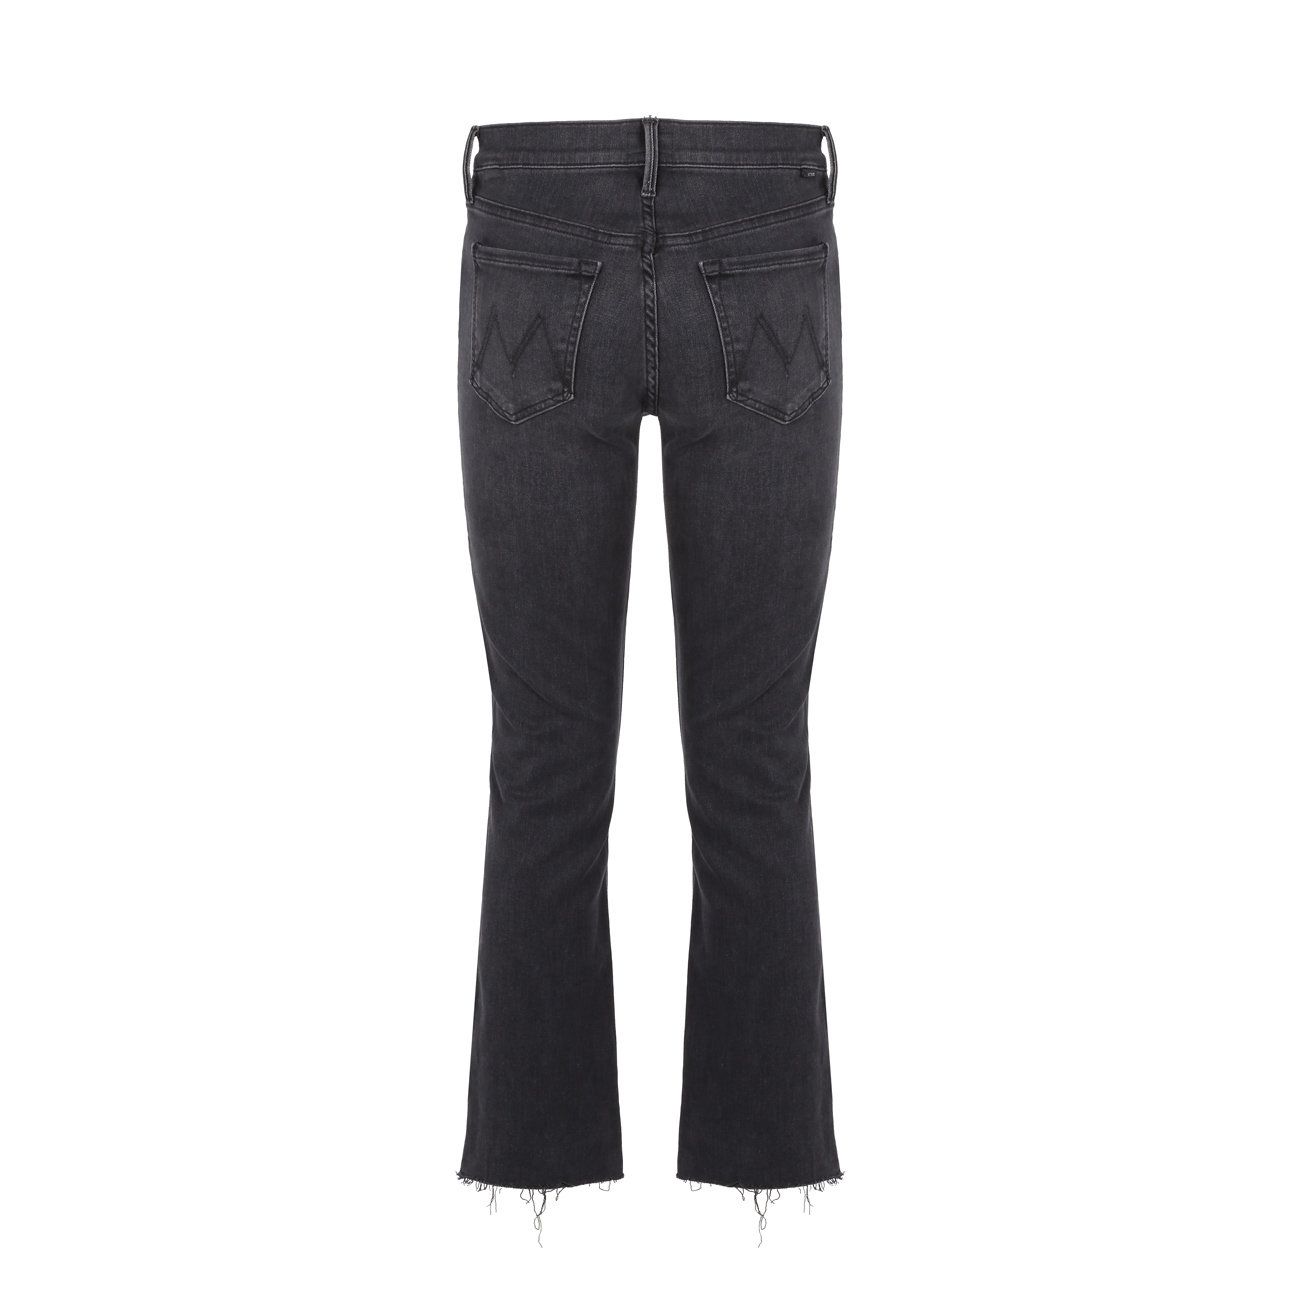 MOTHER JEANS 5 POCKETS WITH FRINGED BOTTOM Woman Black